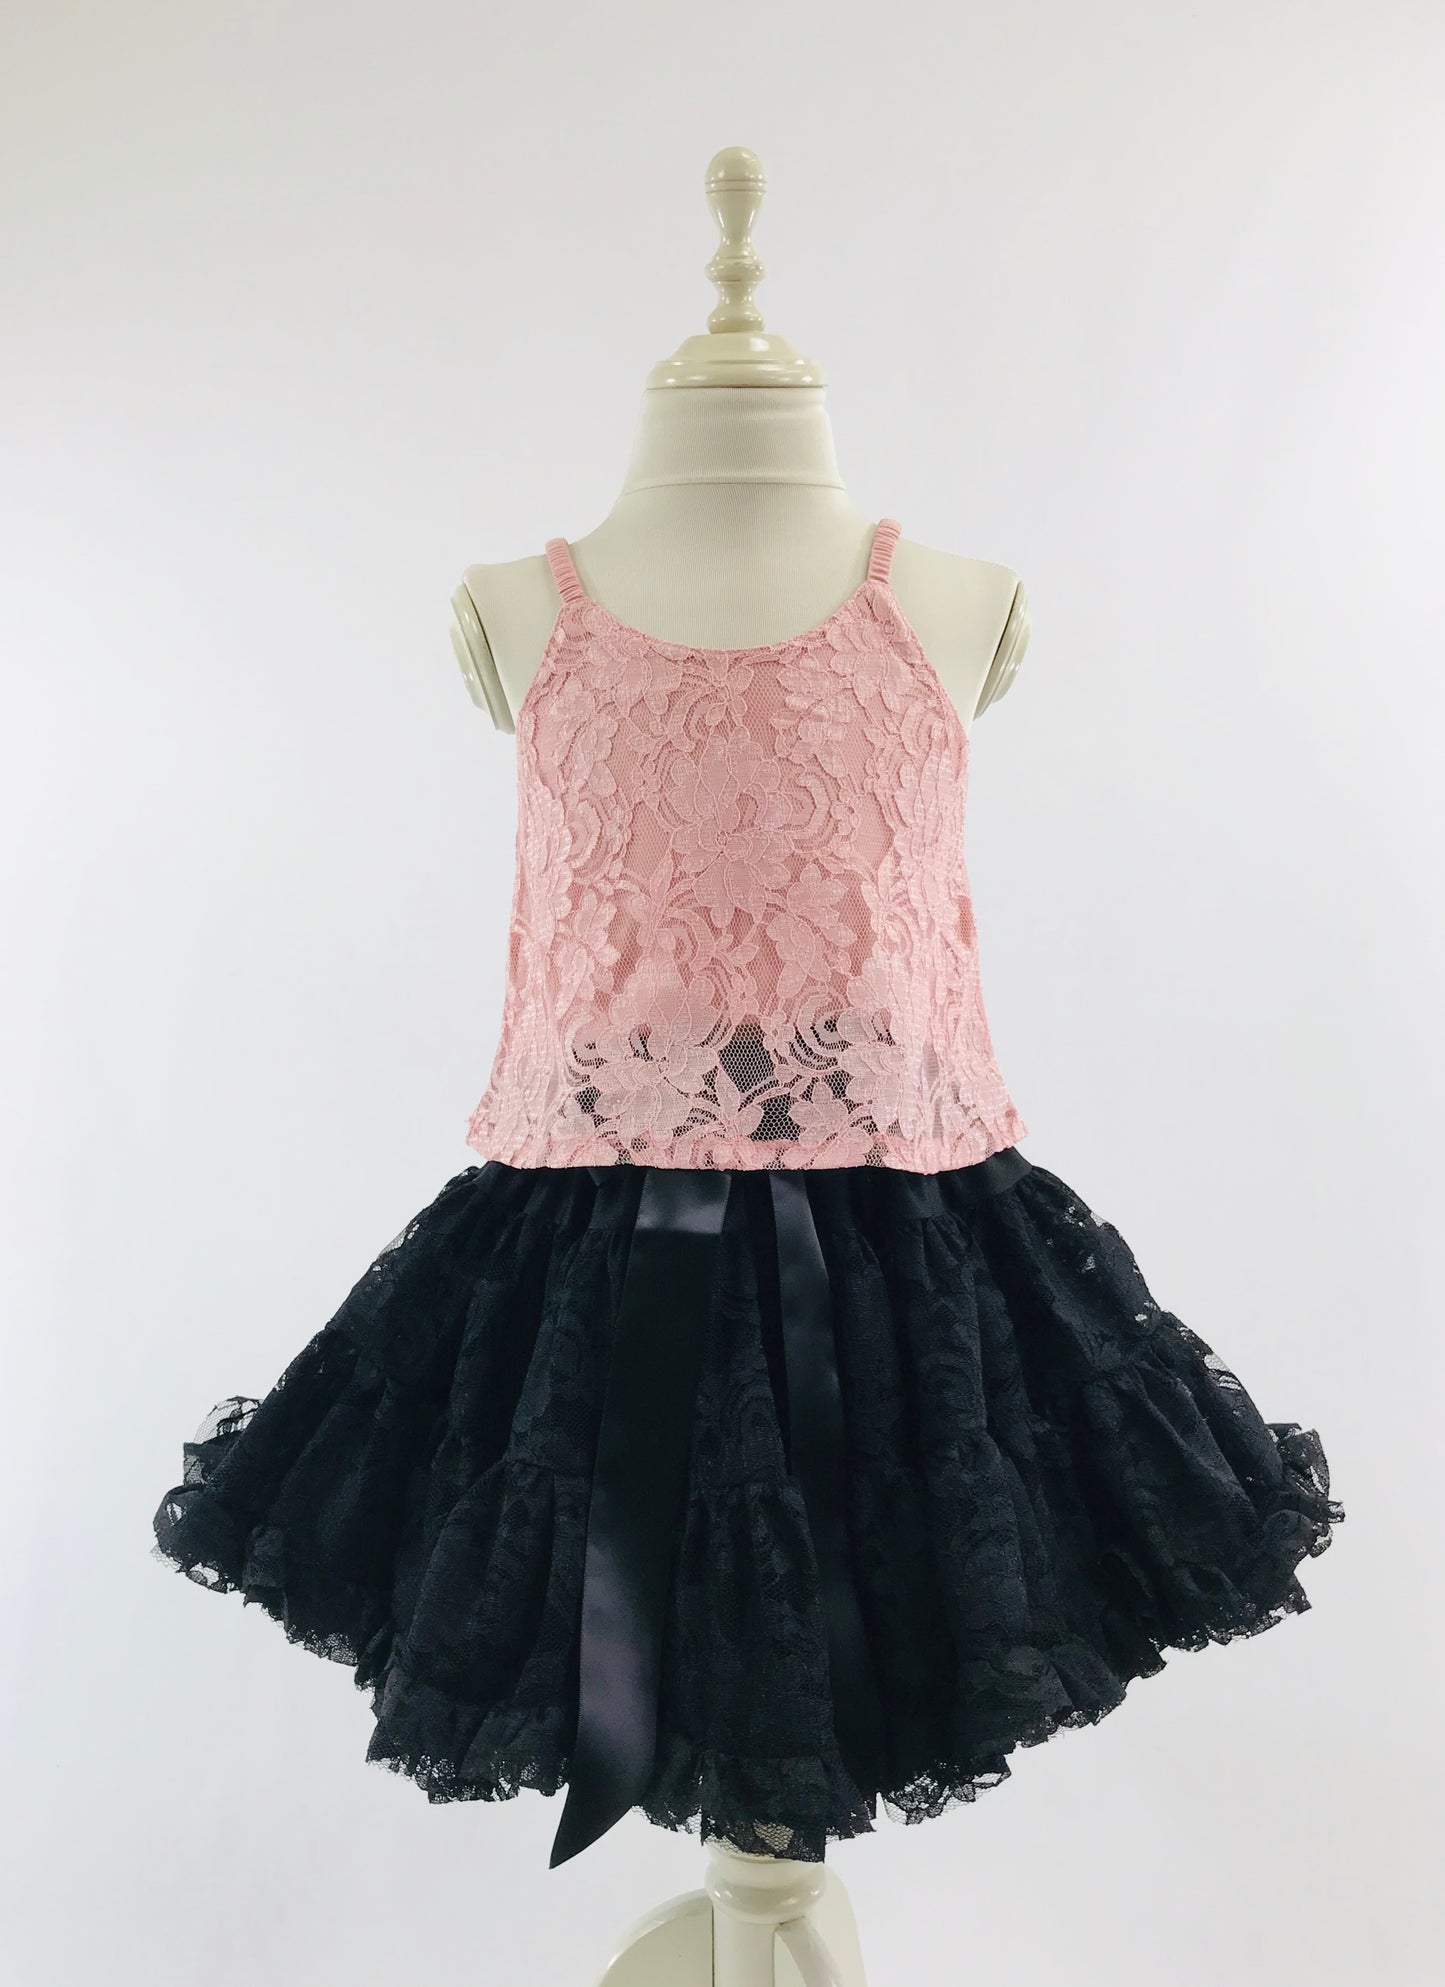 [OUTLET] DOLLY by Le Petit Tom ® LACY SPAGHETTI TOP pink